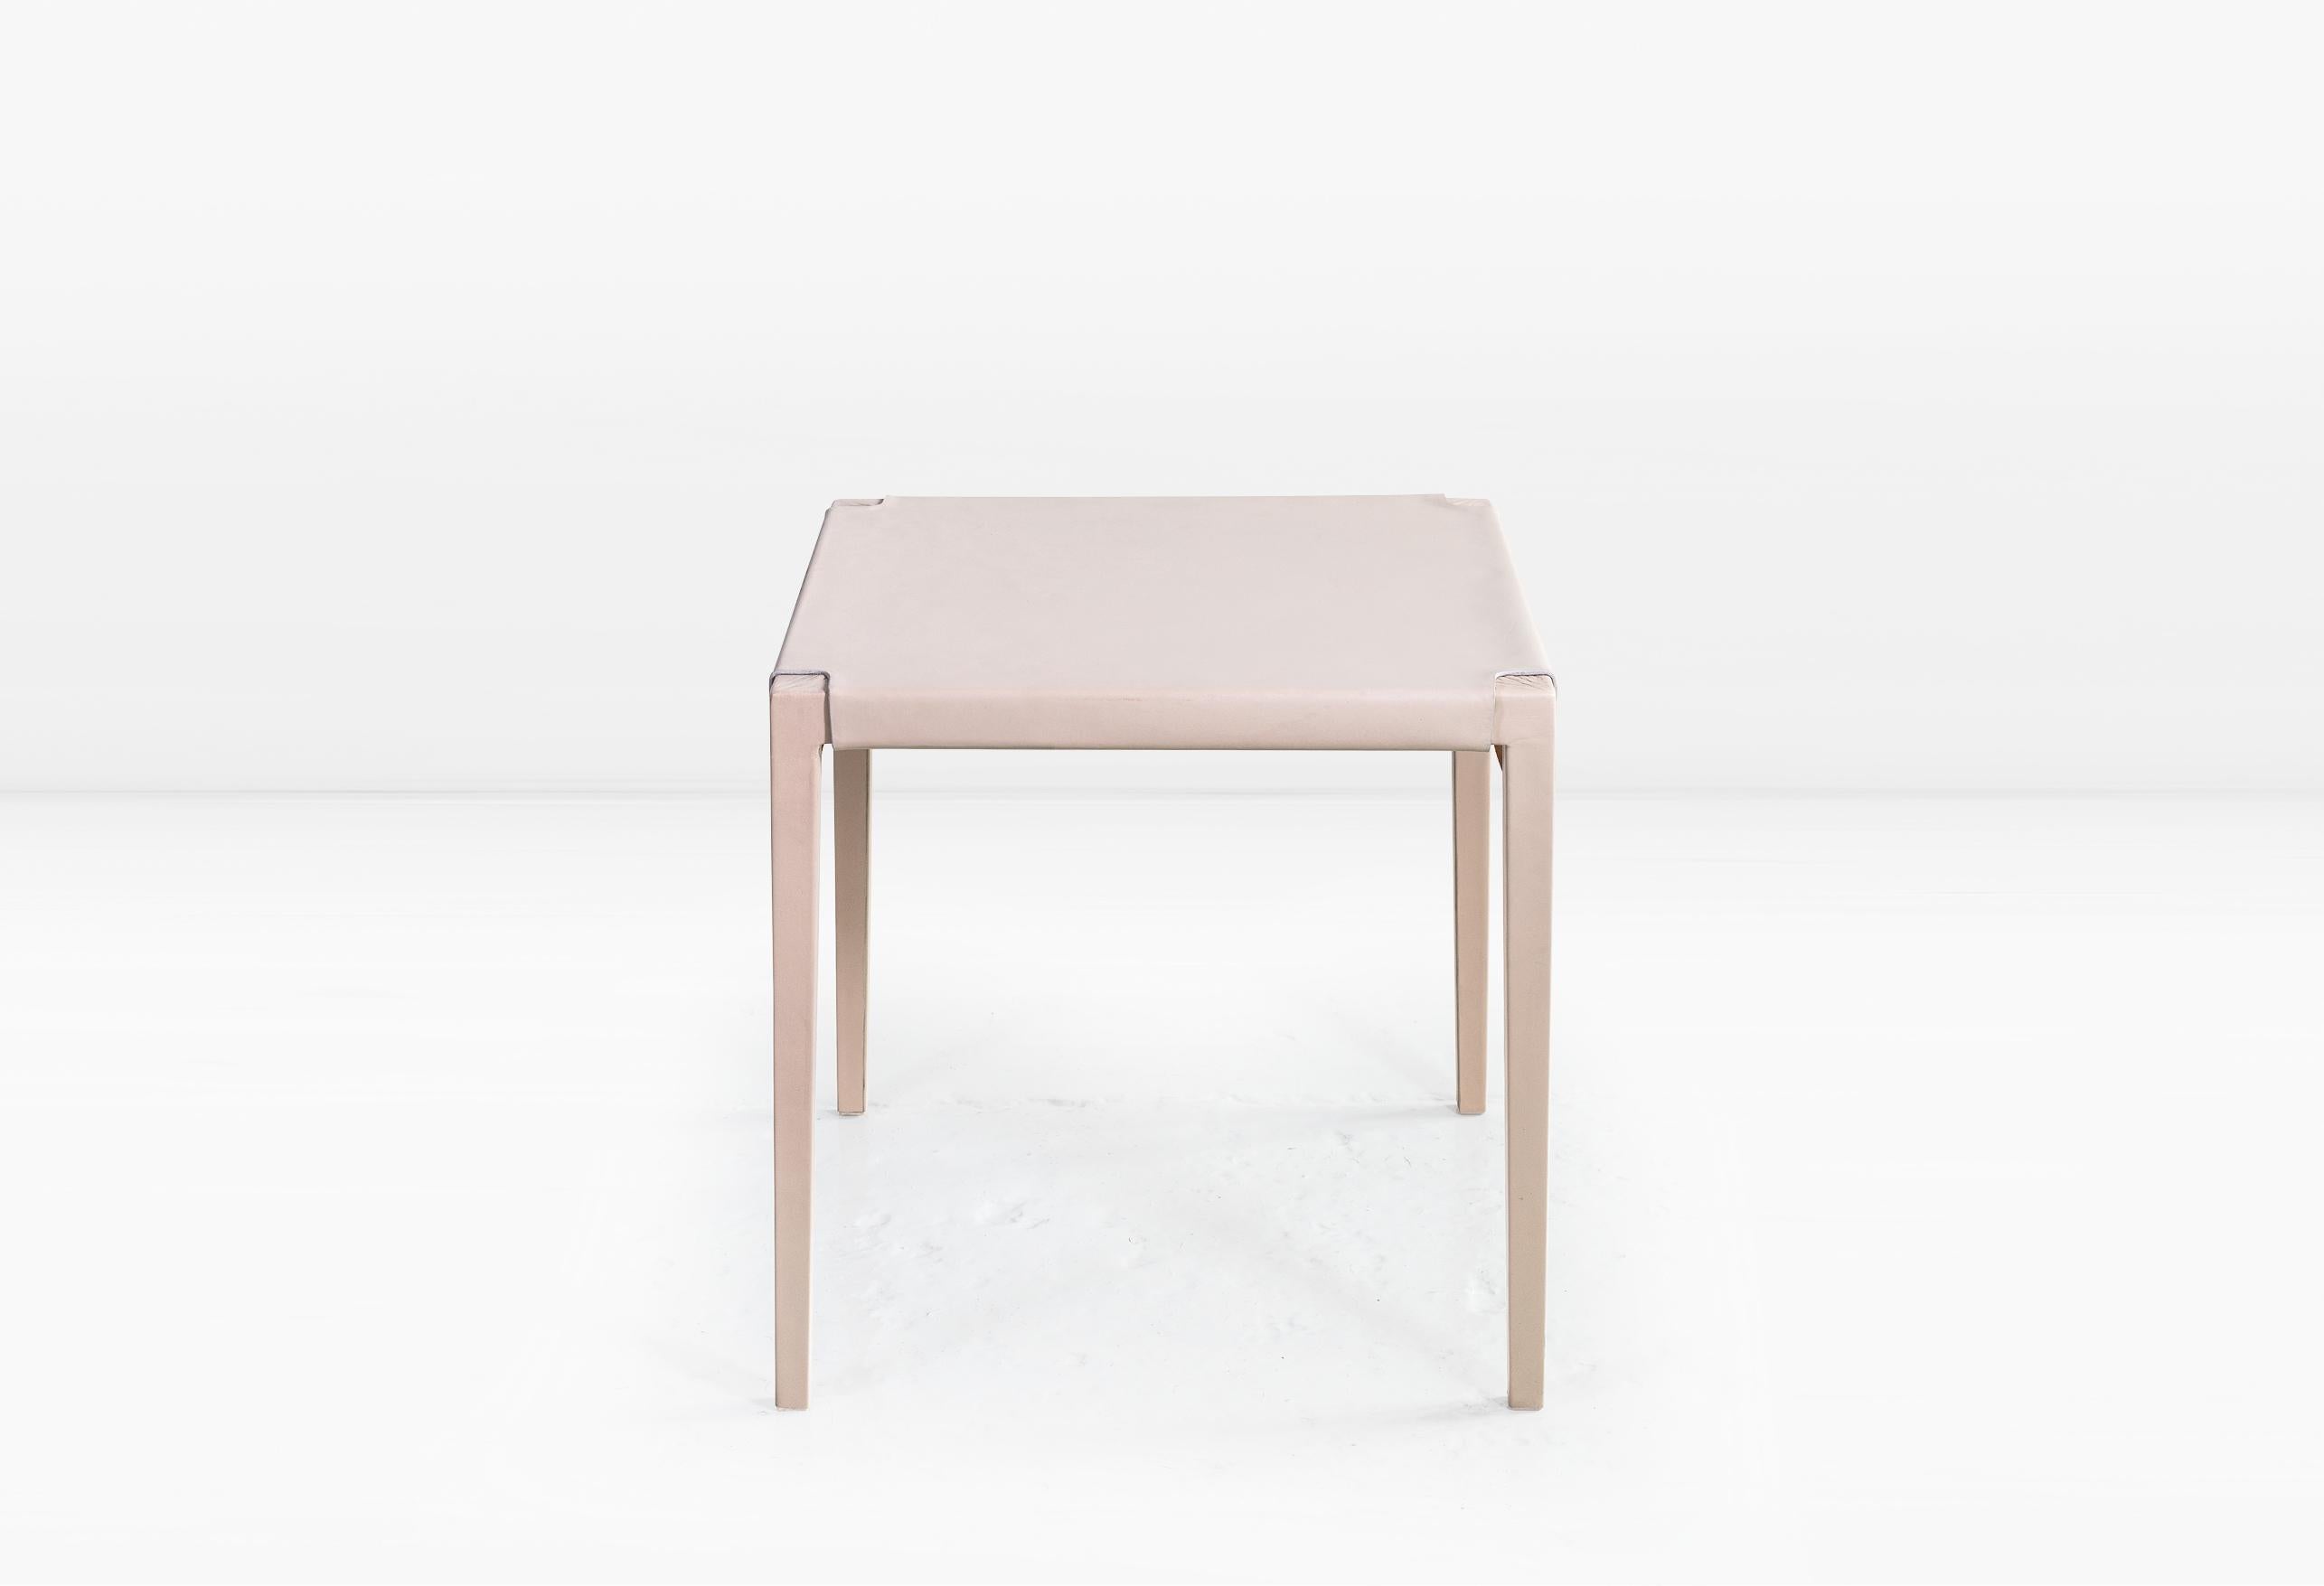 Utilizing a centuries old technique, water-saturated leather hide is molded and stretched over a maple frame to create the Emile Table. Shown in Cream leather.

This is a natural product that may have slight imperfections. This is the beauty of the